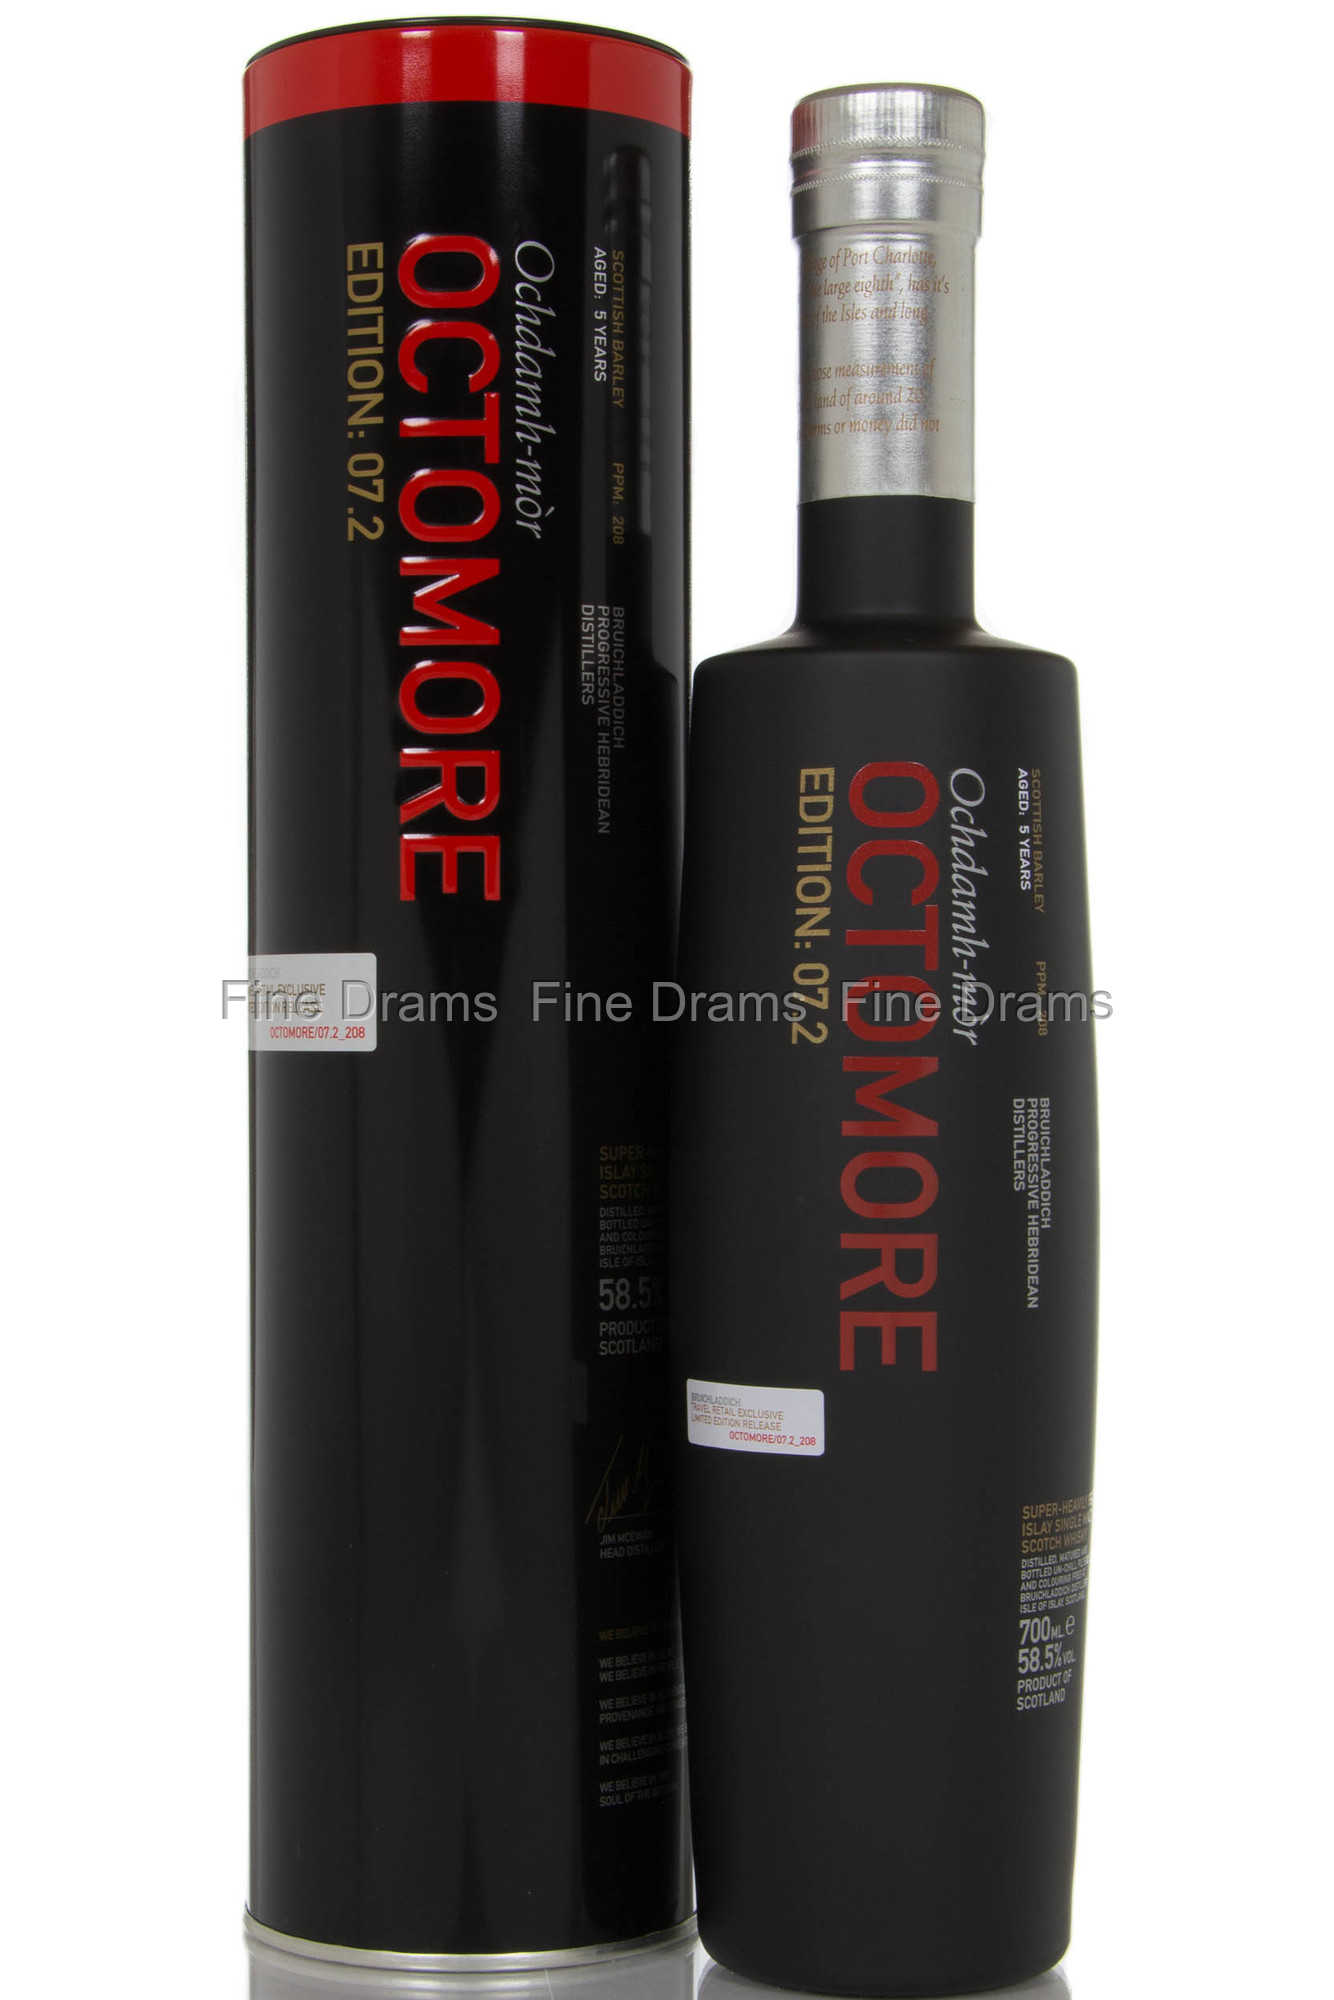 Octomore 7.2 5 Year Old Scotch Single Malt Whisky 